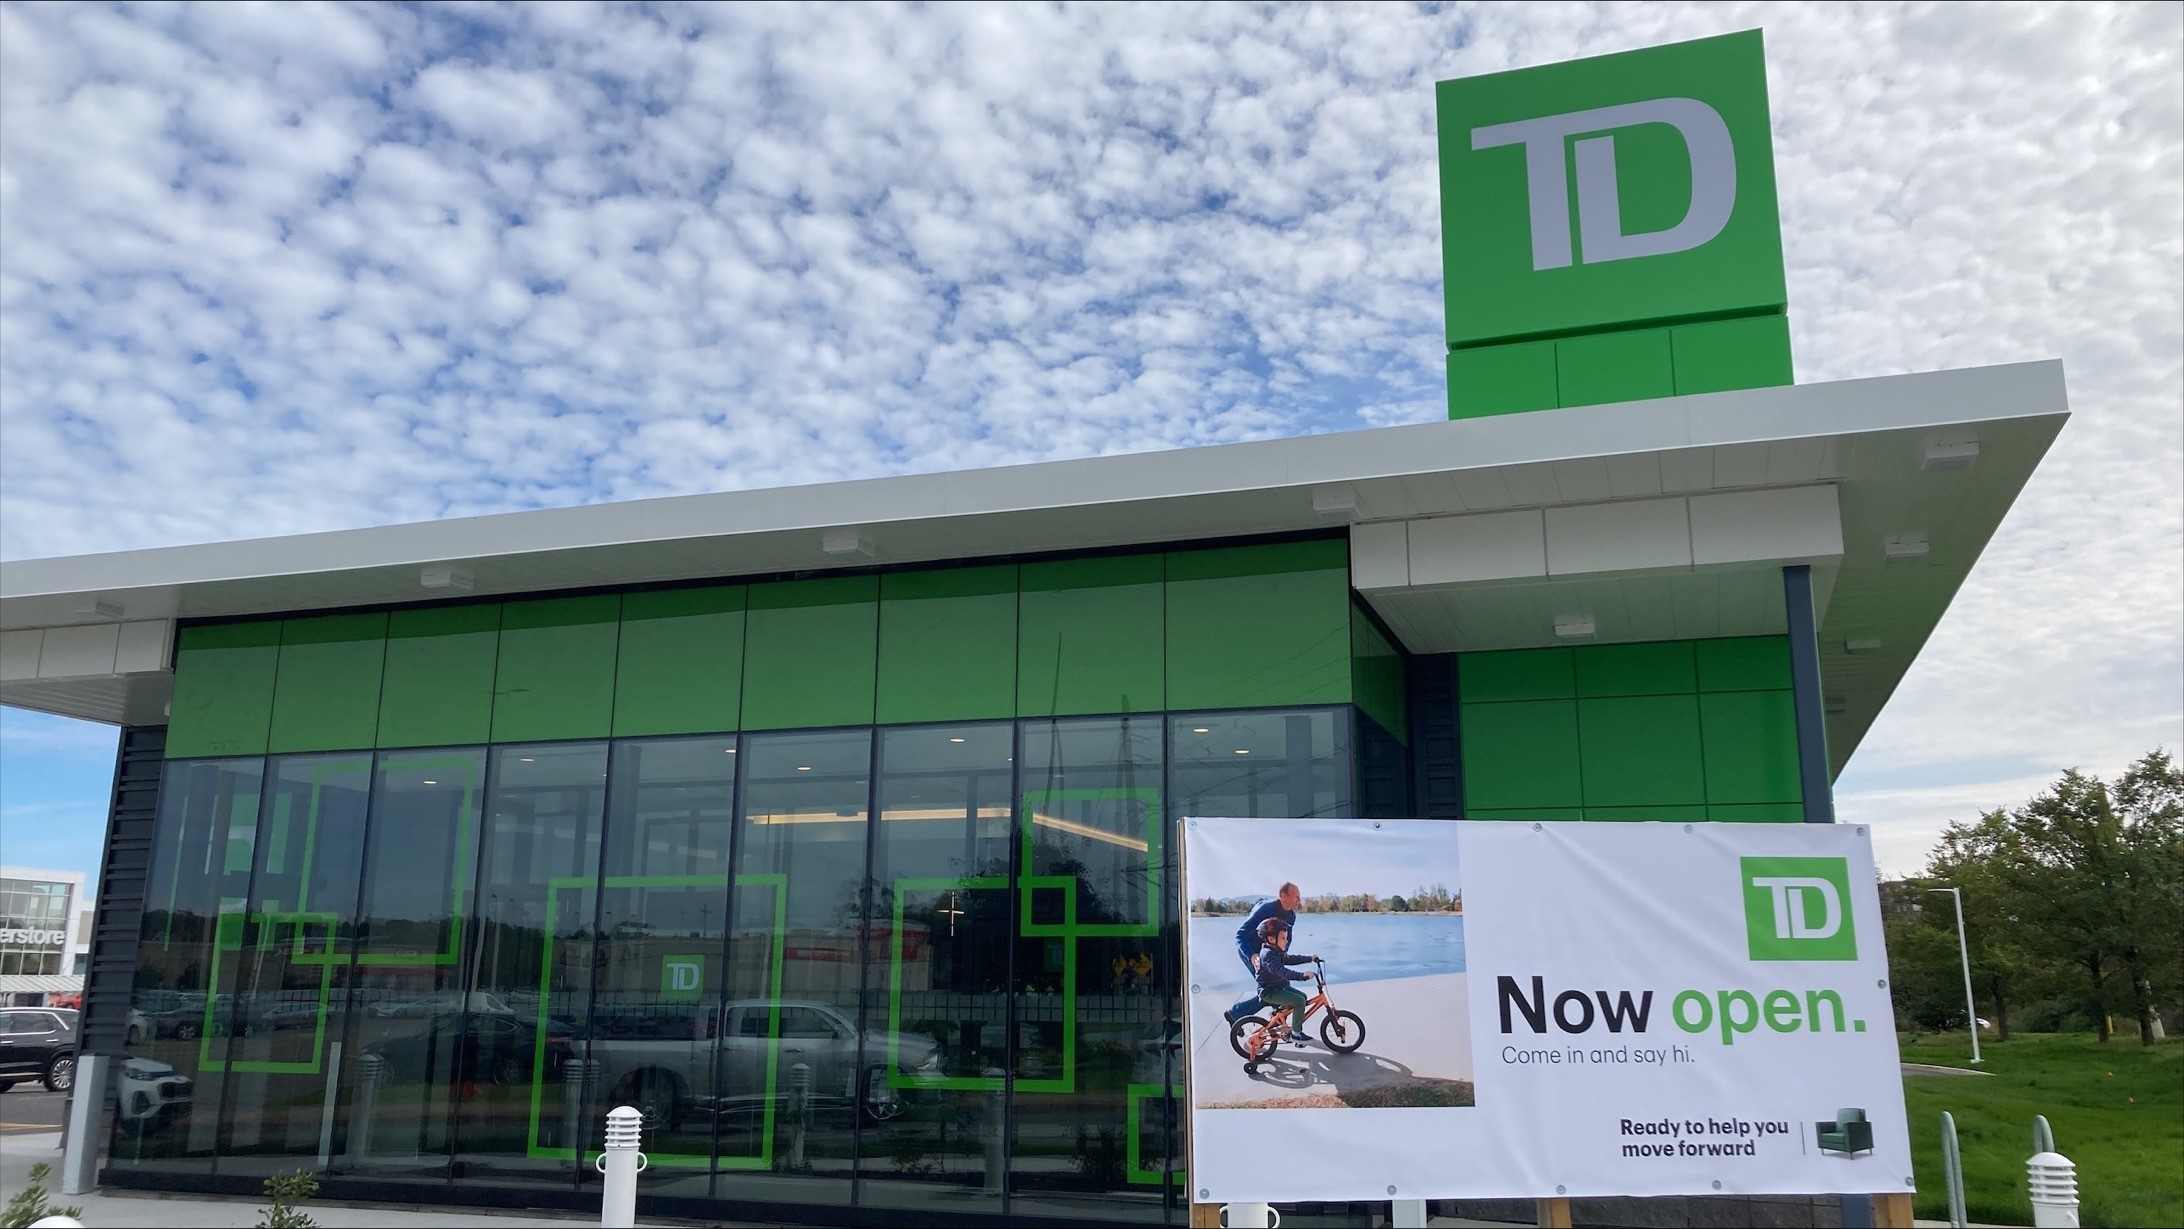 Images TD Canada Trust Branch and ATM